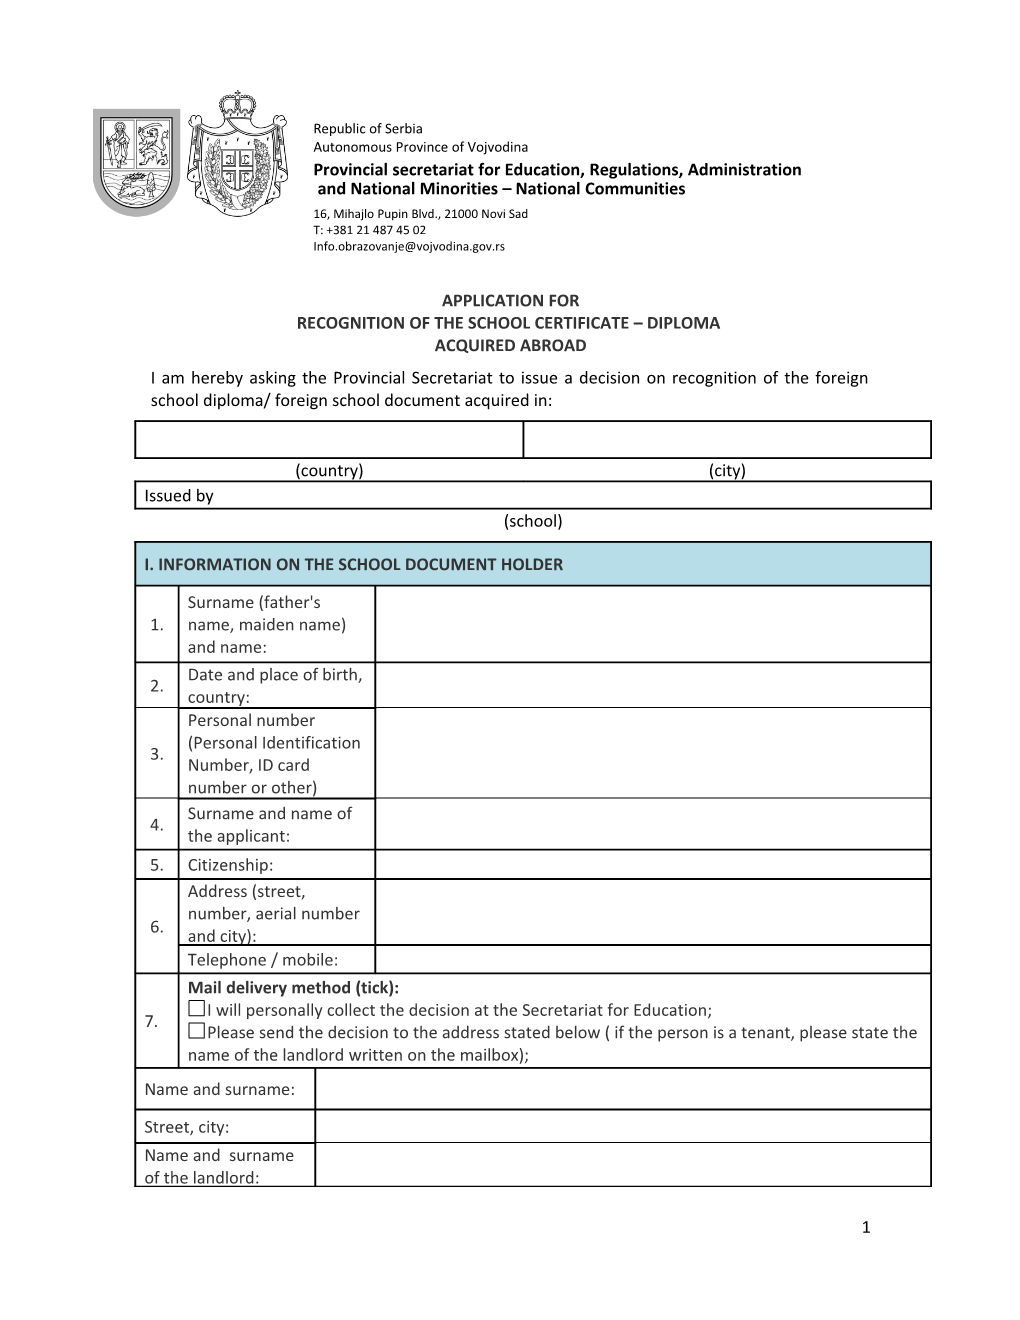 Application for Recognition of the School Certificate Diploma Acquired Abroad